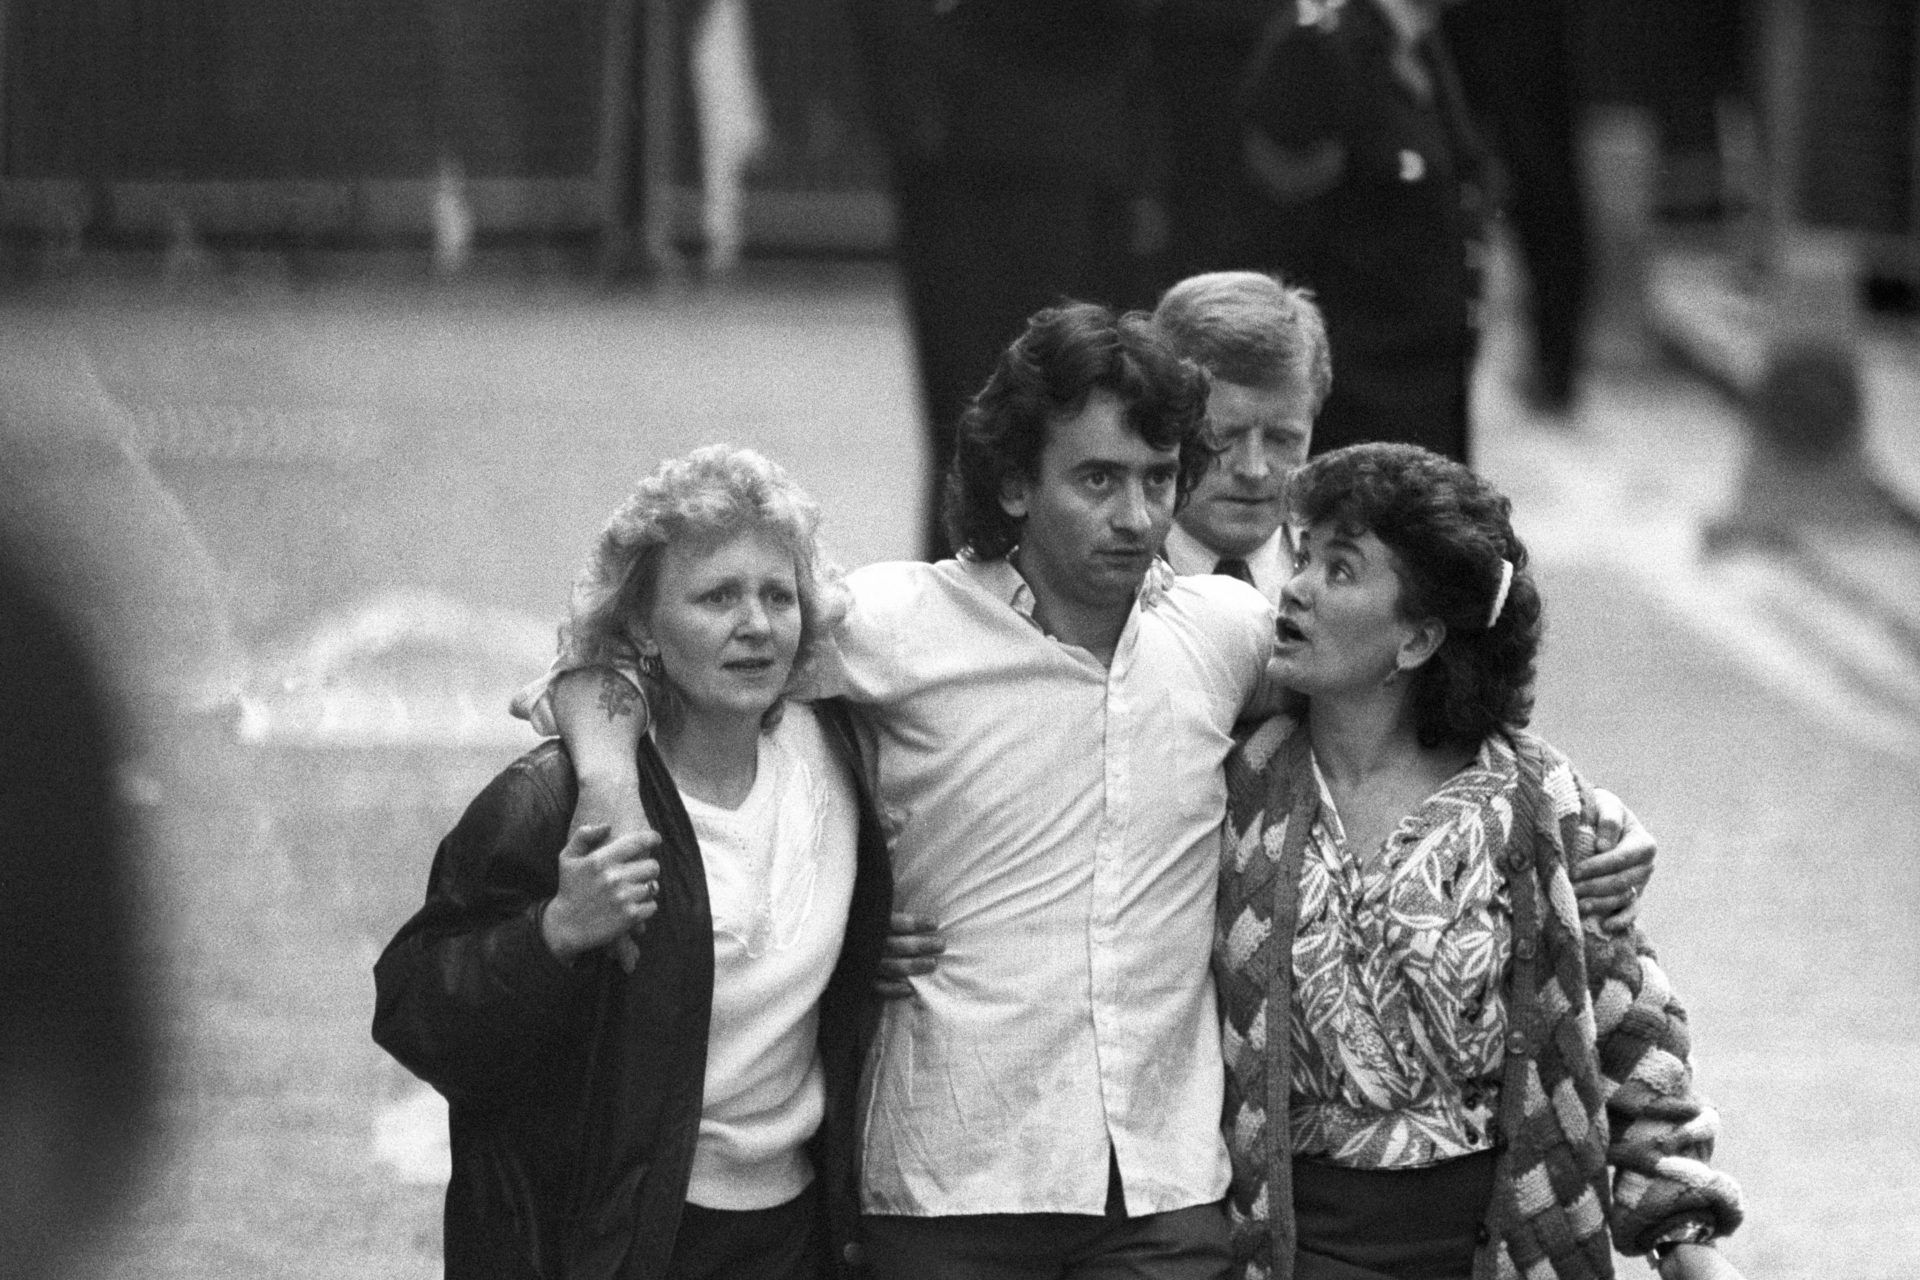 Gerry Conlon, the first of the Guildford Four to be freed, with his sisters Bridie Brennan and Ann McKernan outside the Old Bailey in London